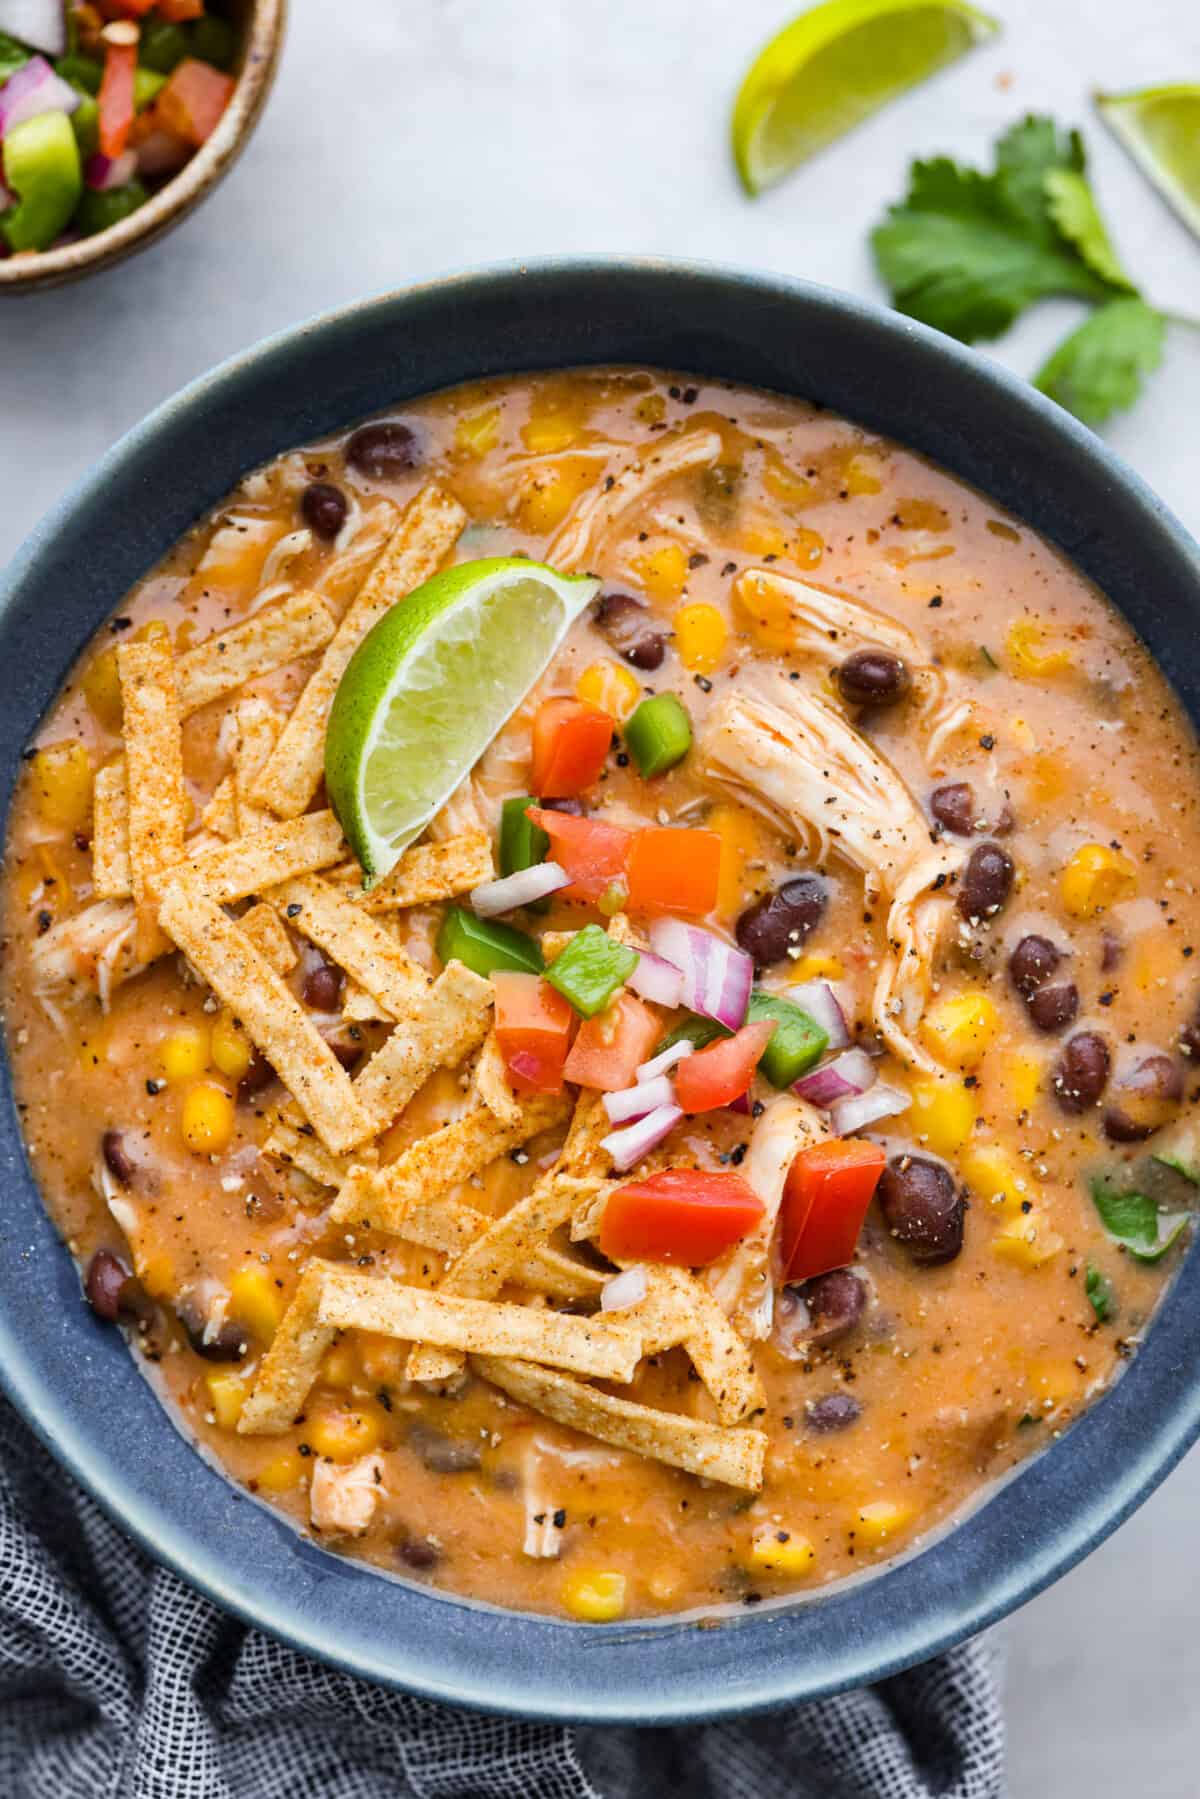 A serving of chicken fajita soup, topped with tortilla strips, diced tomatoes, and a lime wedge.